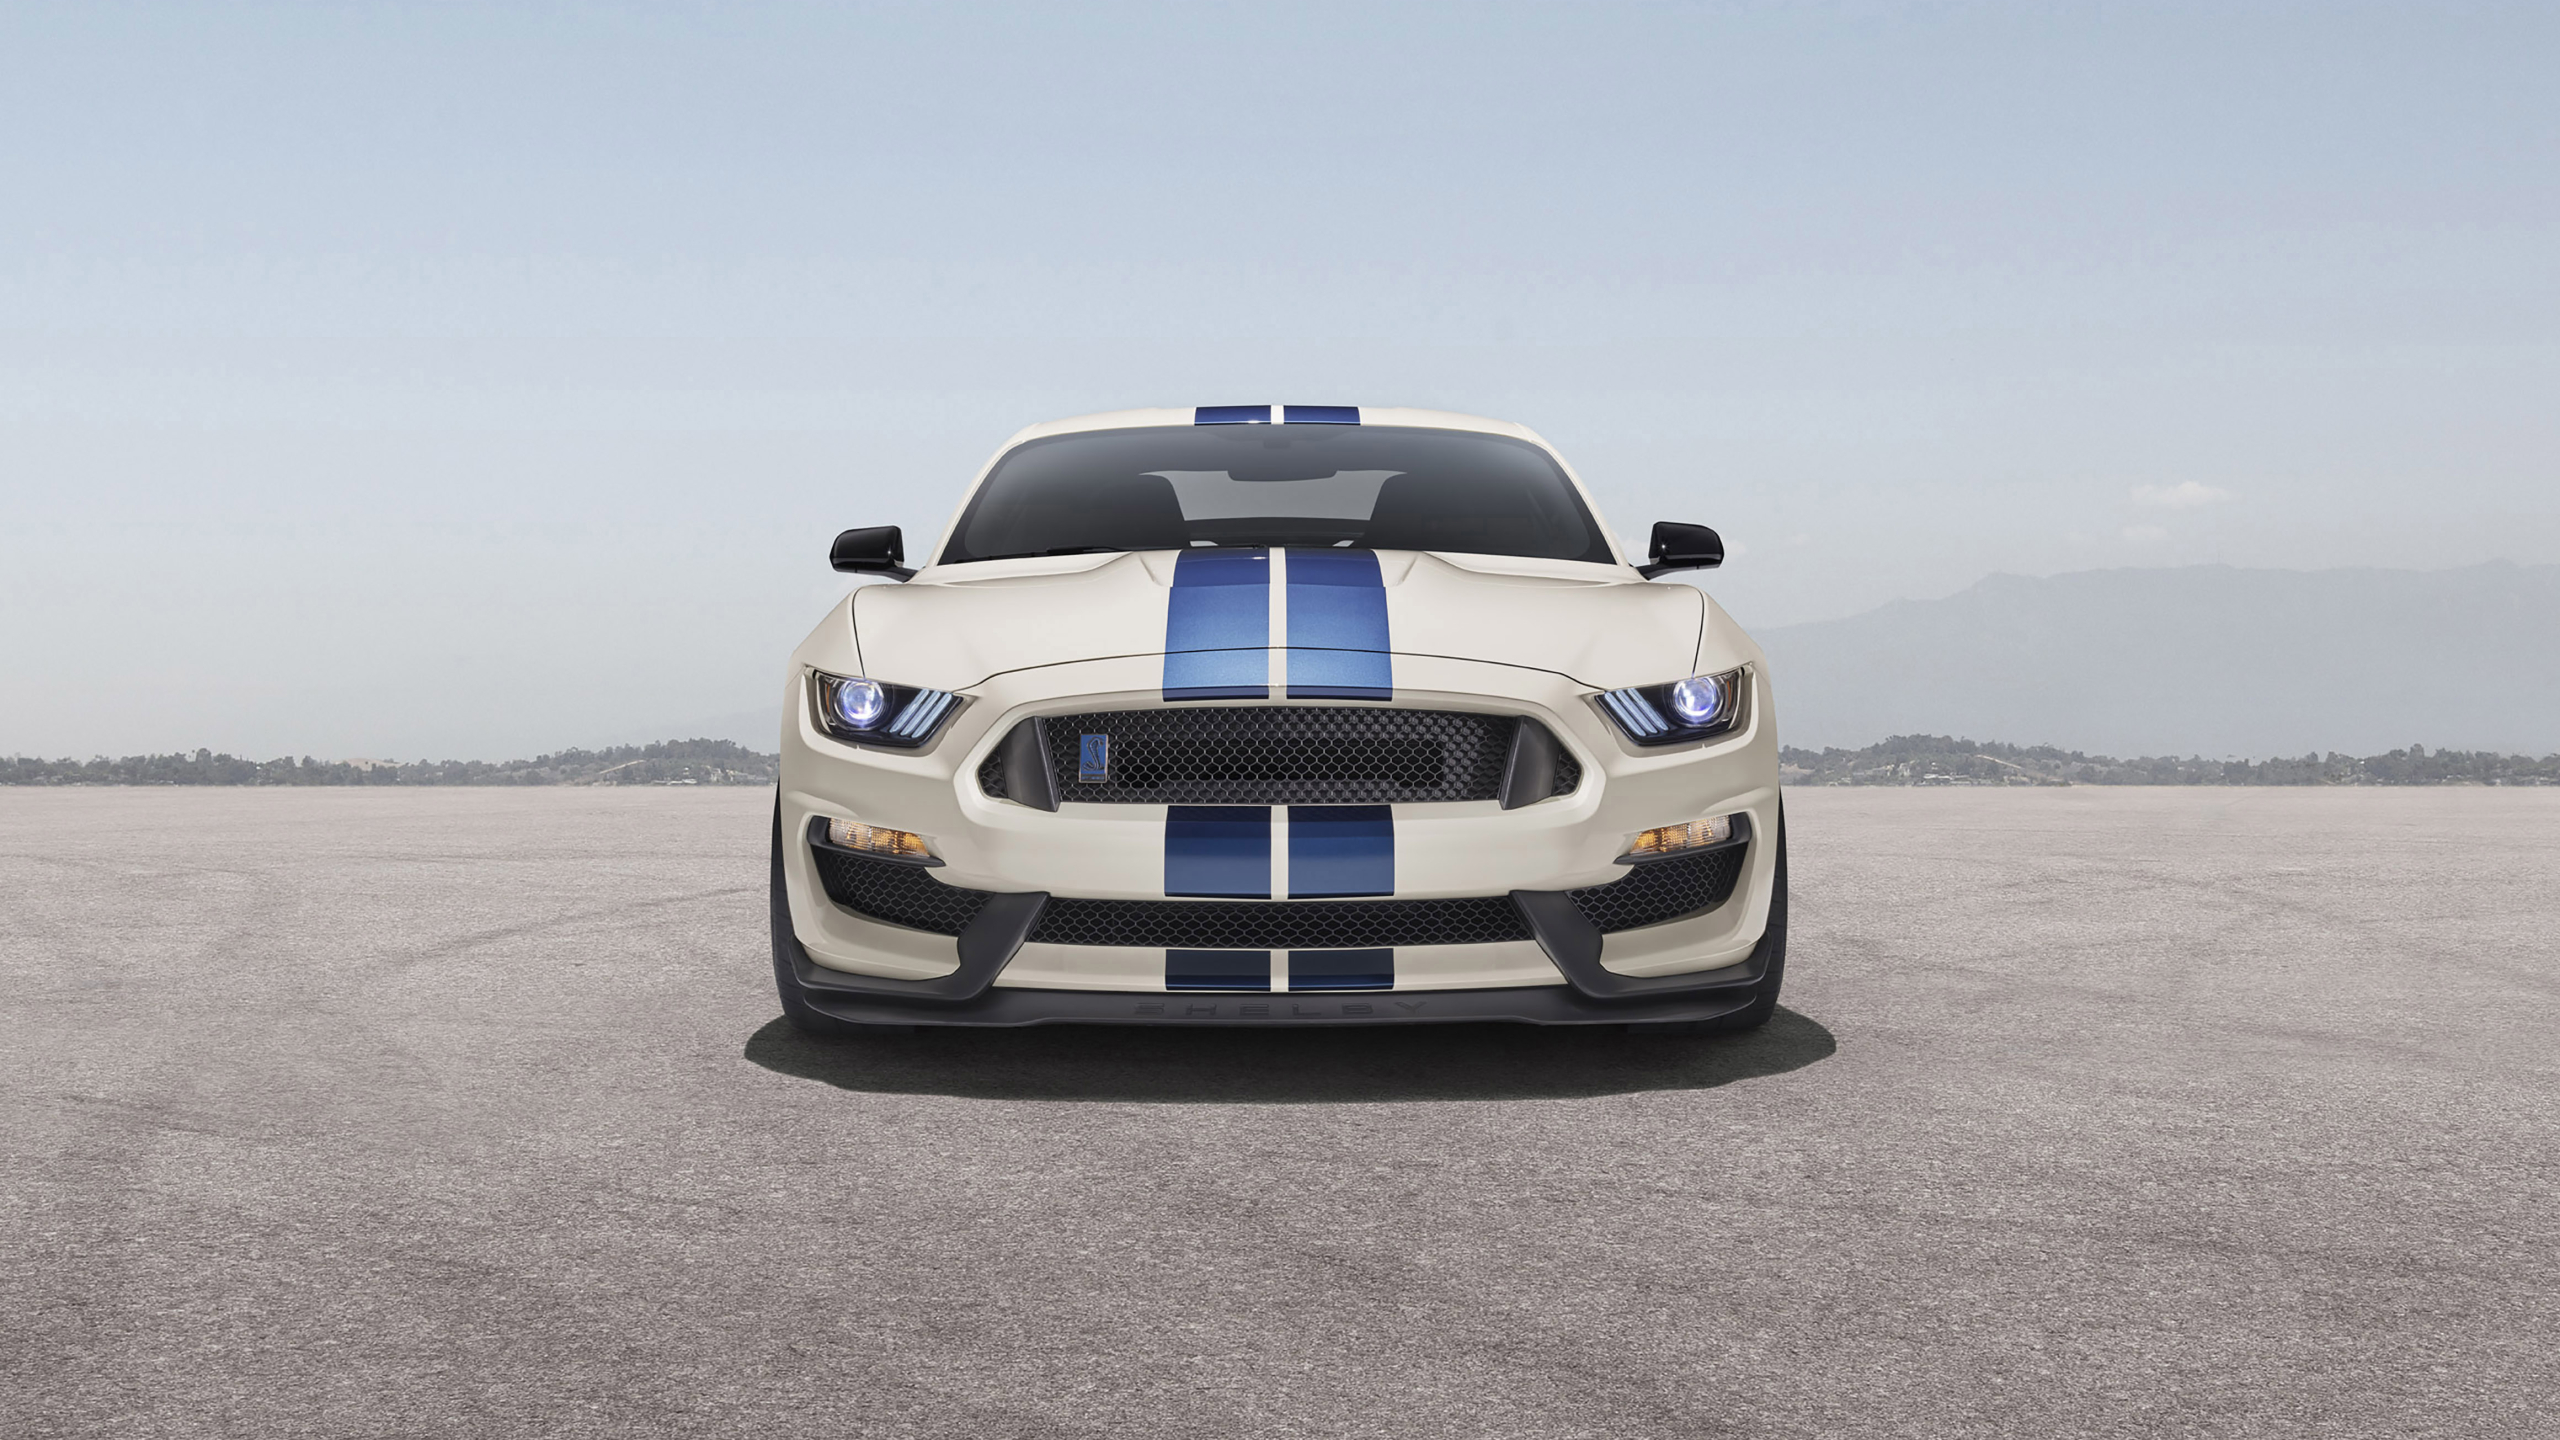 2560x1440 Ford Mustang Shelby Gt350 1440p Resolution Wallpaper Hd Cars 4k Wallpapers Images Photos And Background Wallpapers Den